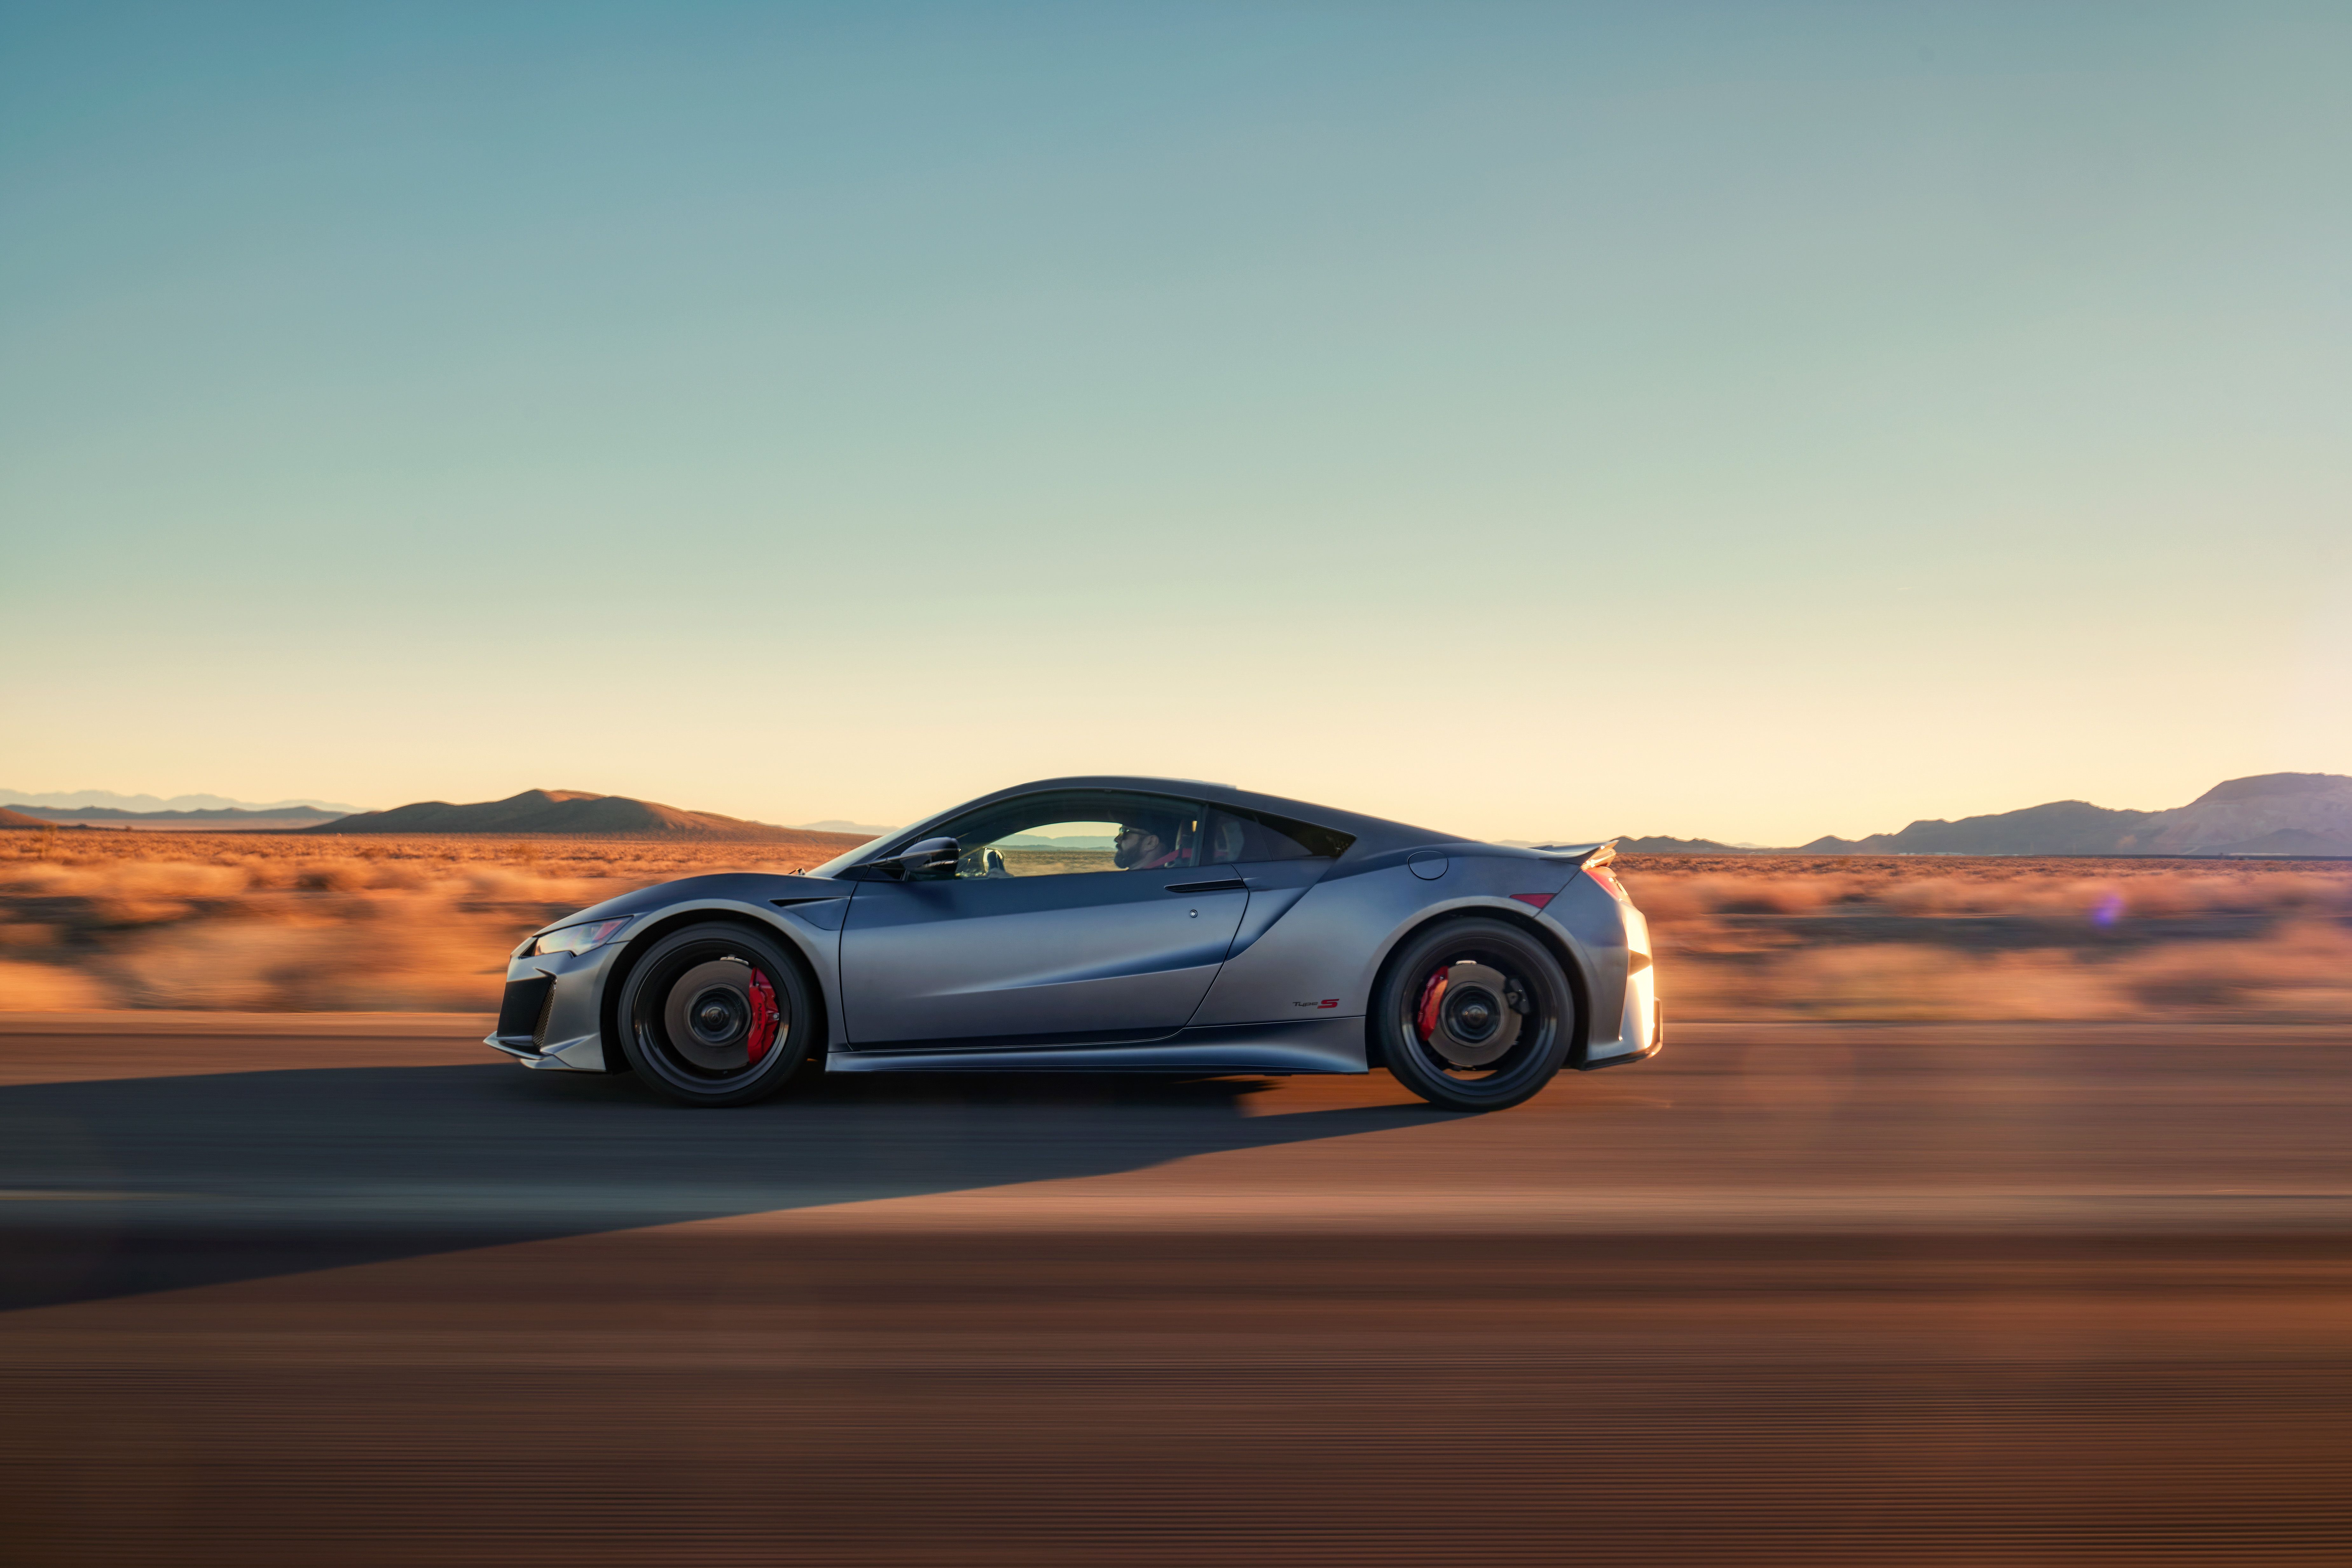 2022 Acura NSX Type S First Drive Review: Going Out With a Bang